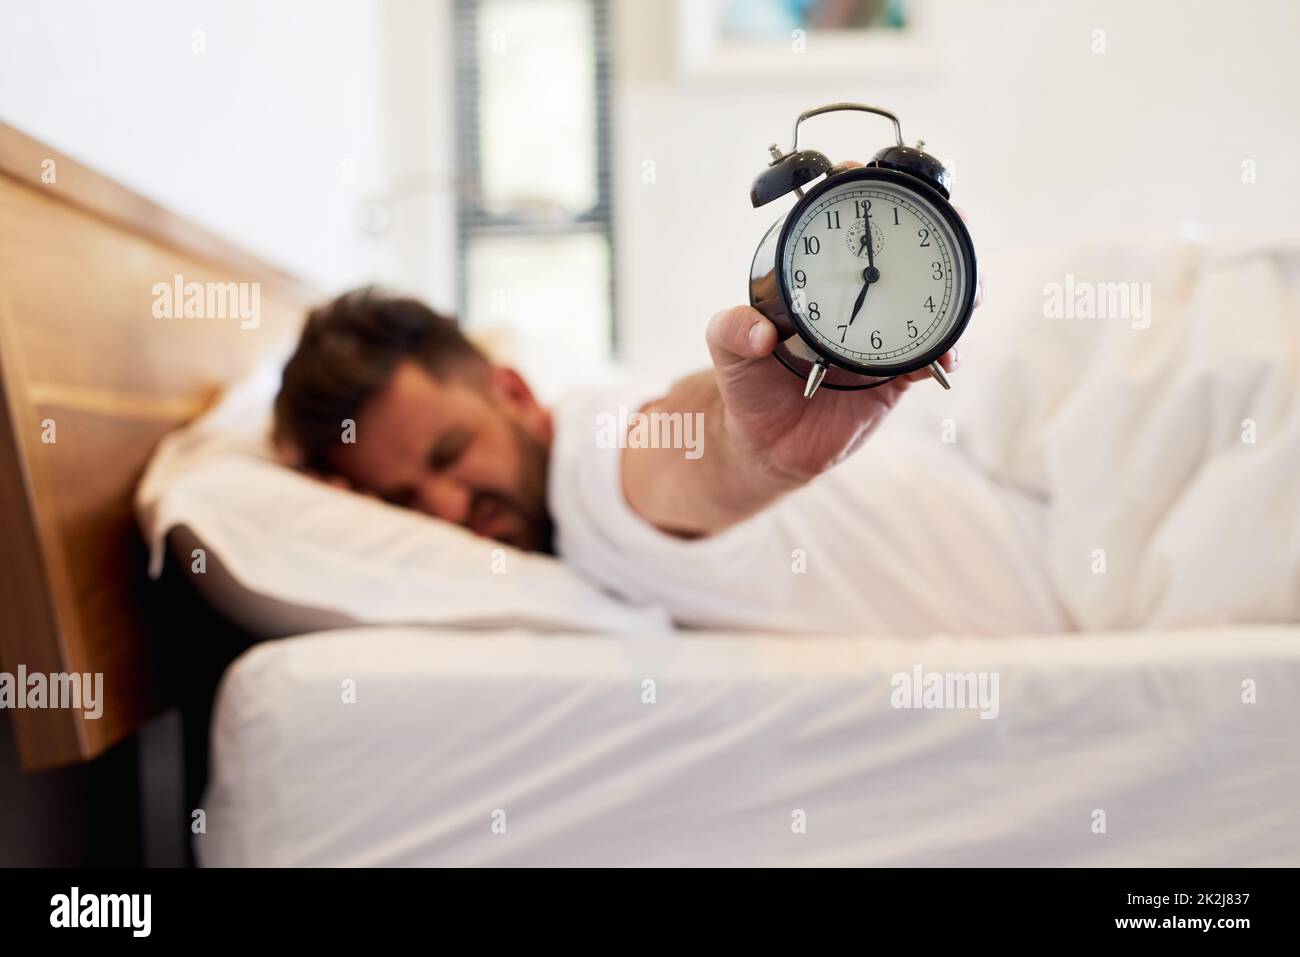 Time to face the day. Cropped shot of a young man holding up an alarm clock while waking up from bed at home. Stock Photo